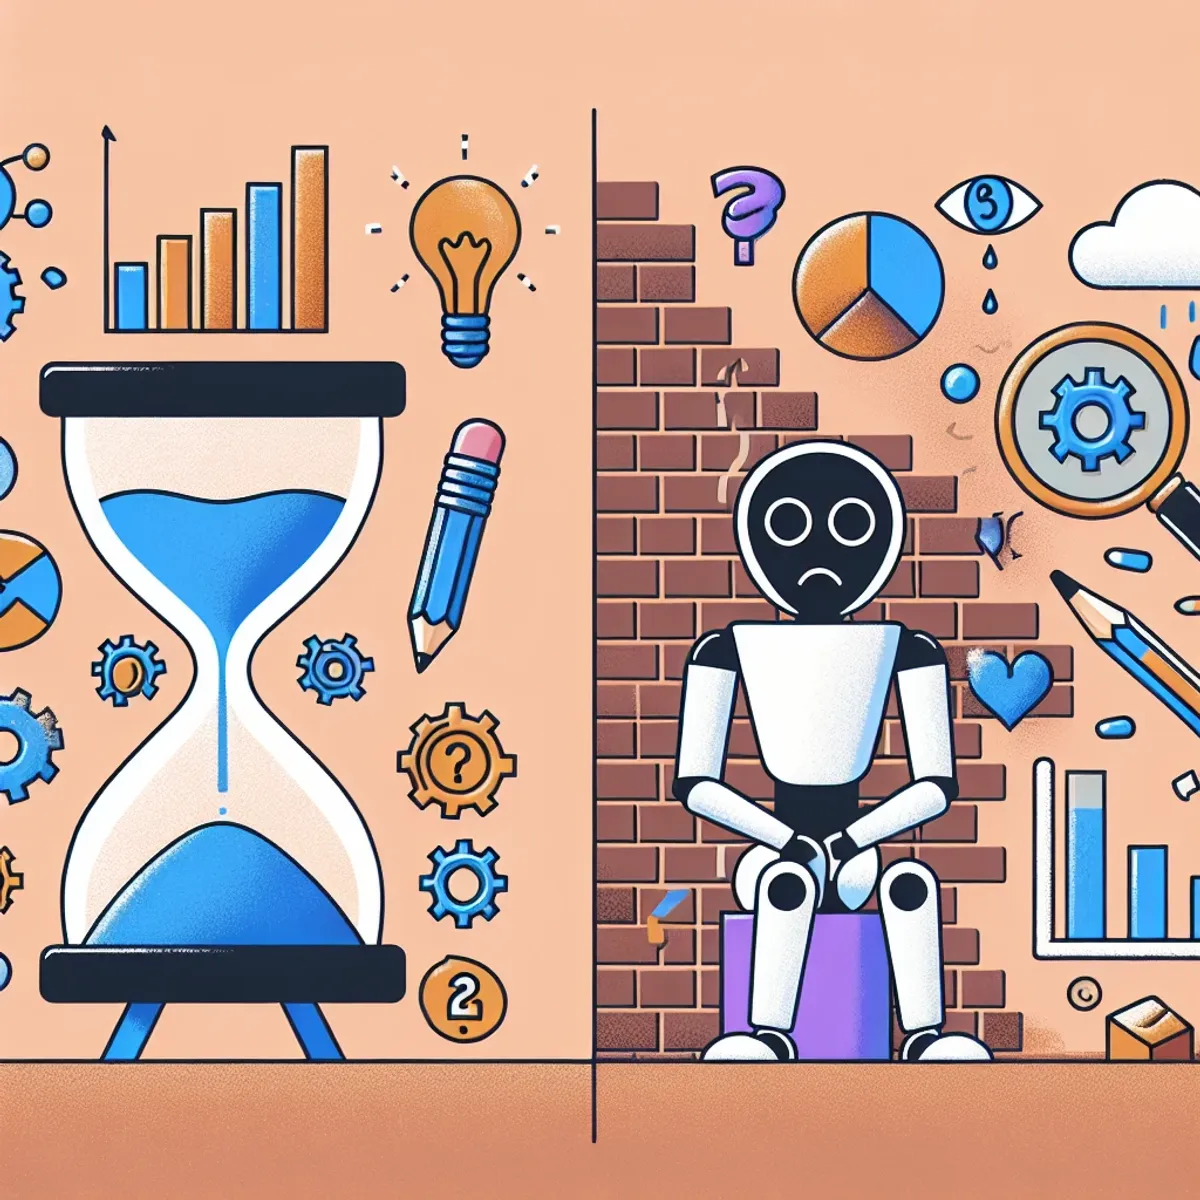 An hourglass nearly empty, a magnifying glass inspecting a bar chart, a robot sitting in front of a brick wall with question marks, and a dull pencil.